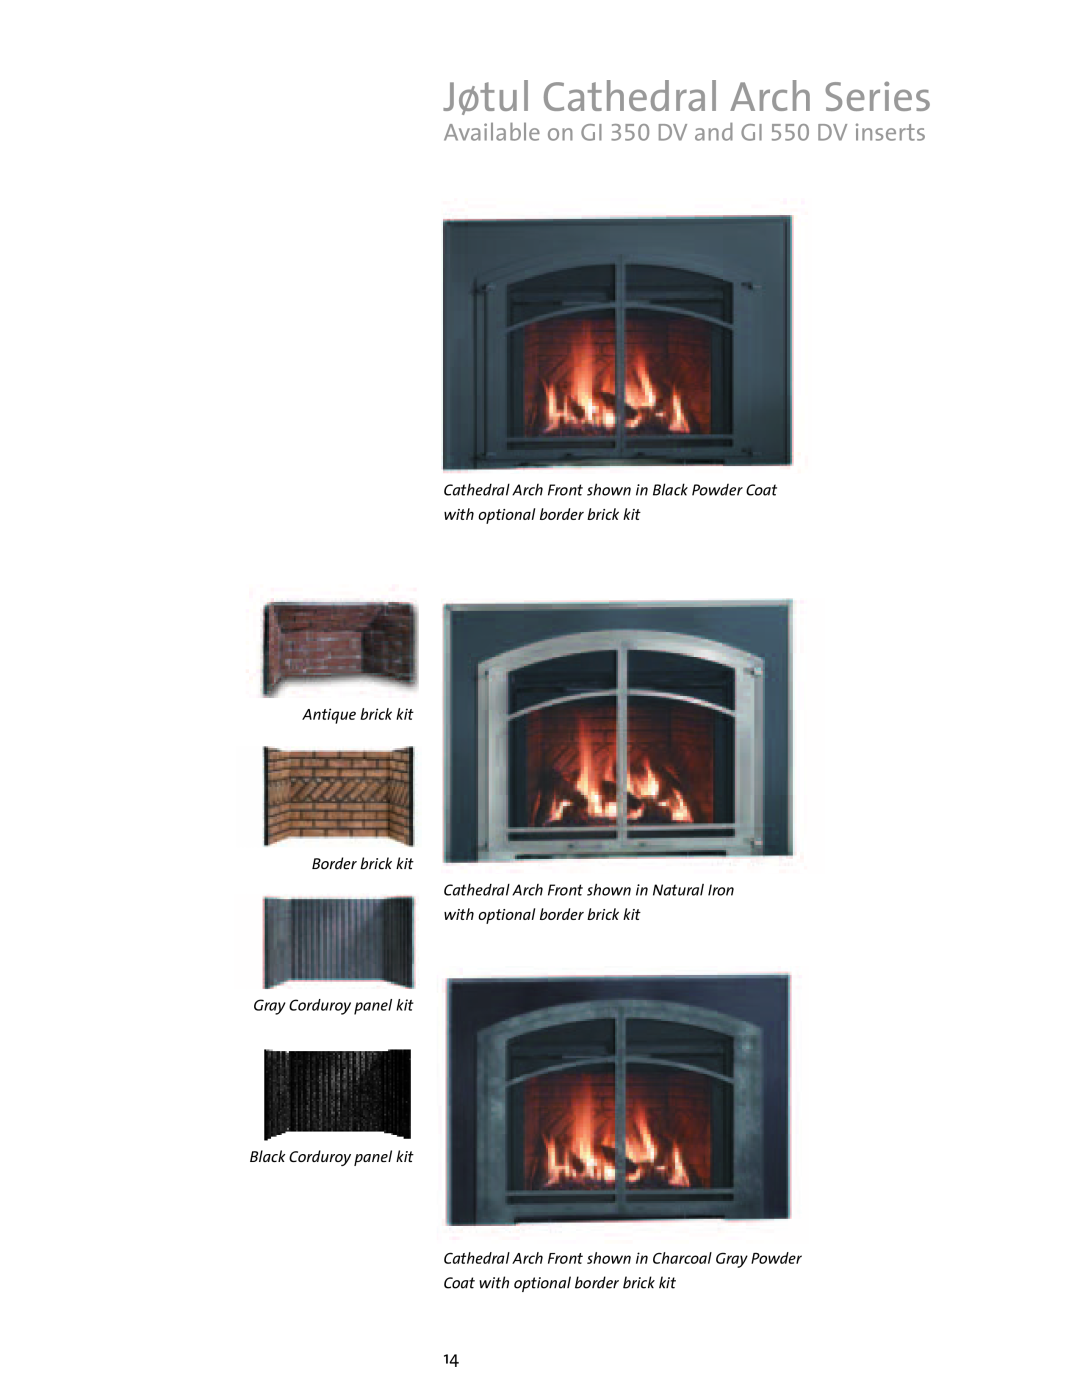 Jotul Gas Inserts and Fireplaces brochure Jøtul Cathedral Arch Series, Available on GI 350 DV and GI 550 DV inserts 